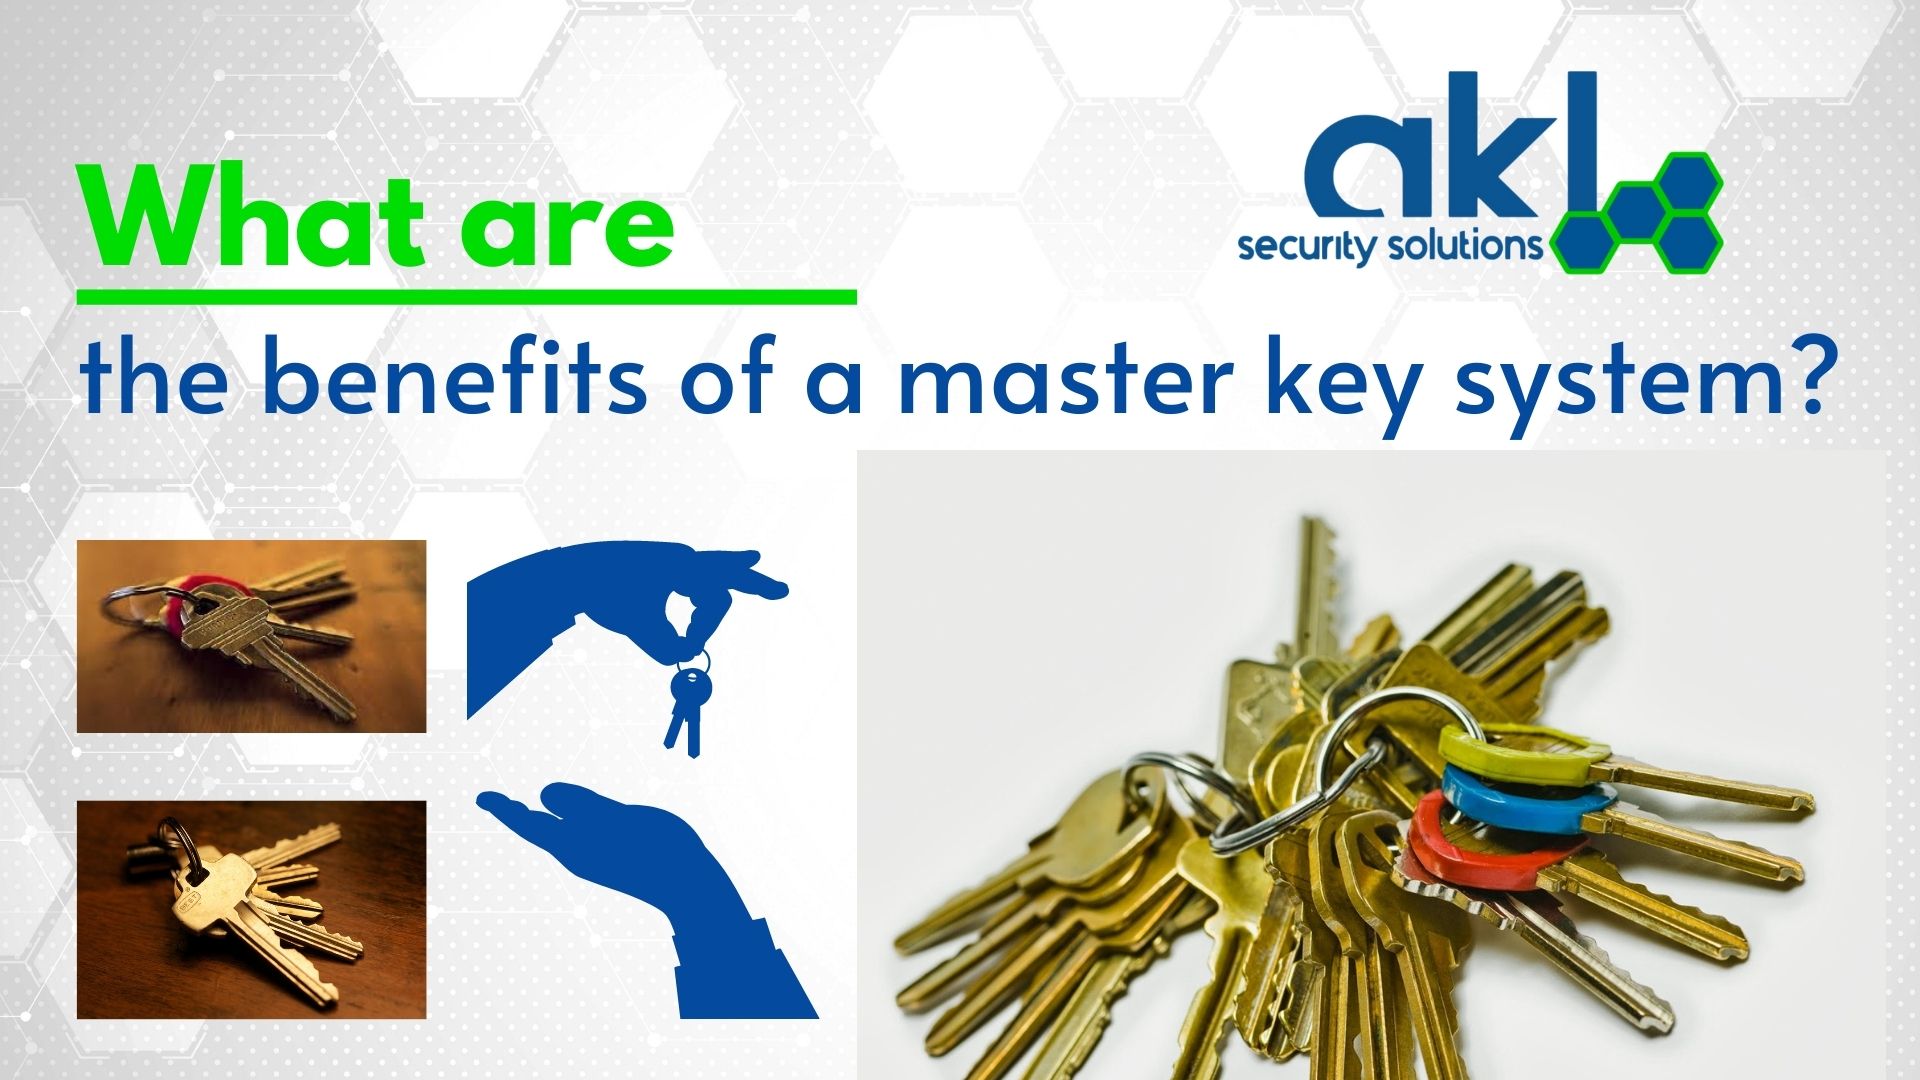  What are the Benefits to a Master Key System